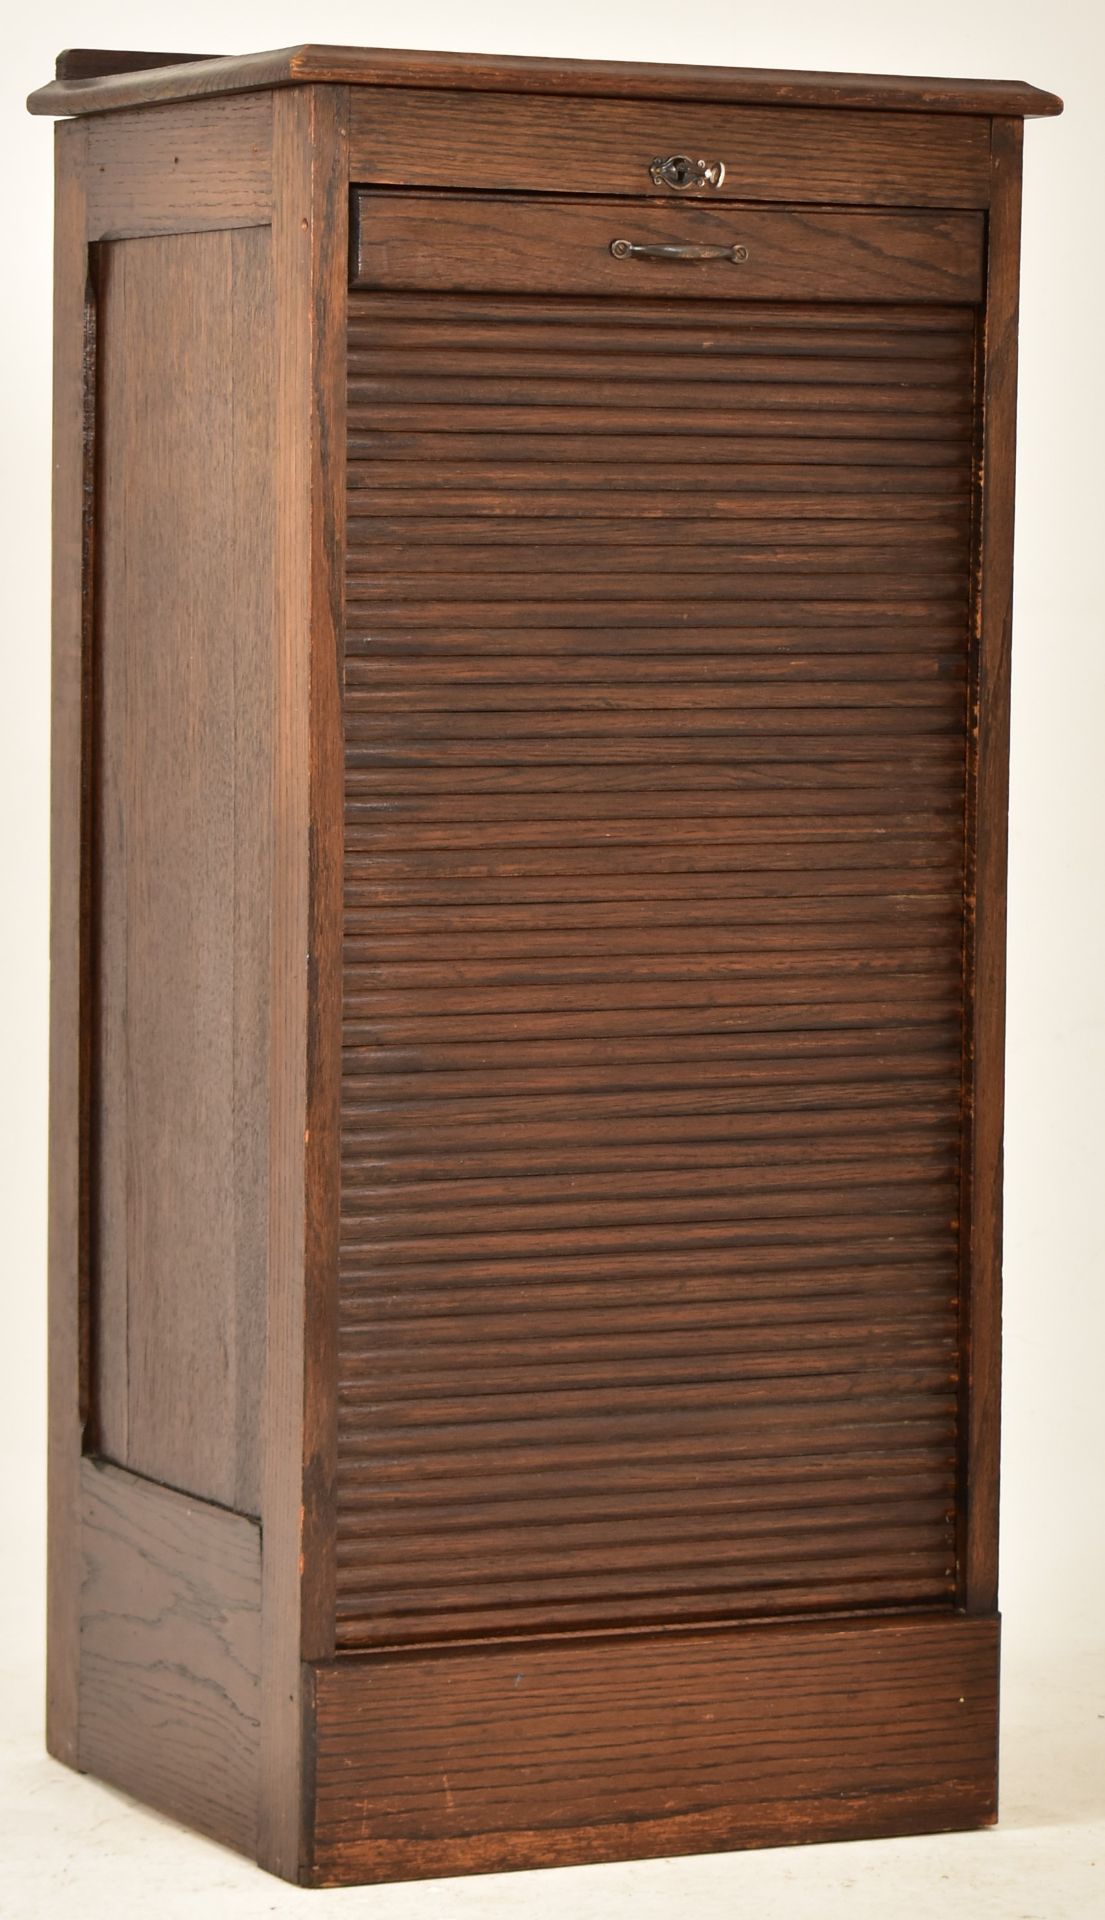 EARLY 20TH CENTURY ART DECO OAK PEDESTAL CABINET CHEST - Image 2 of 6